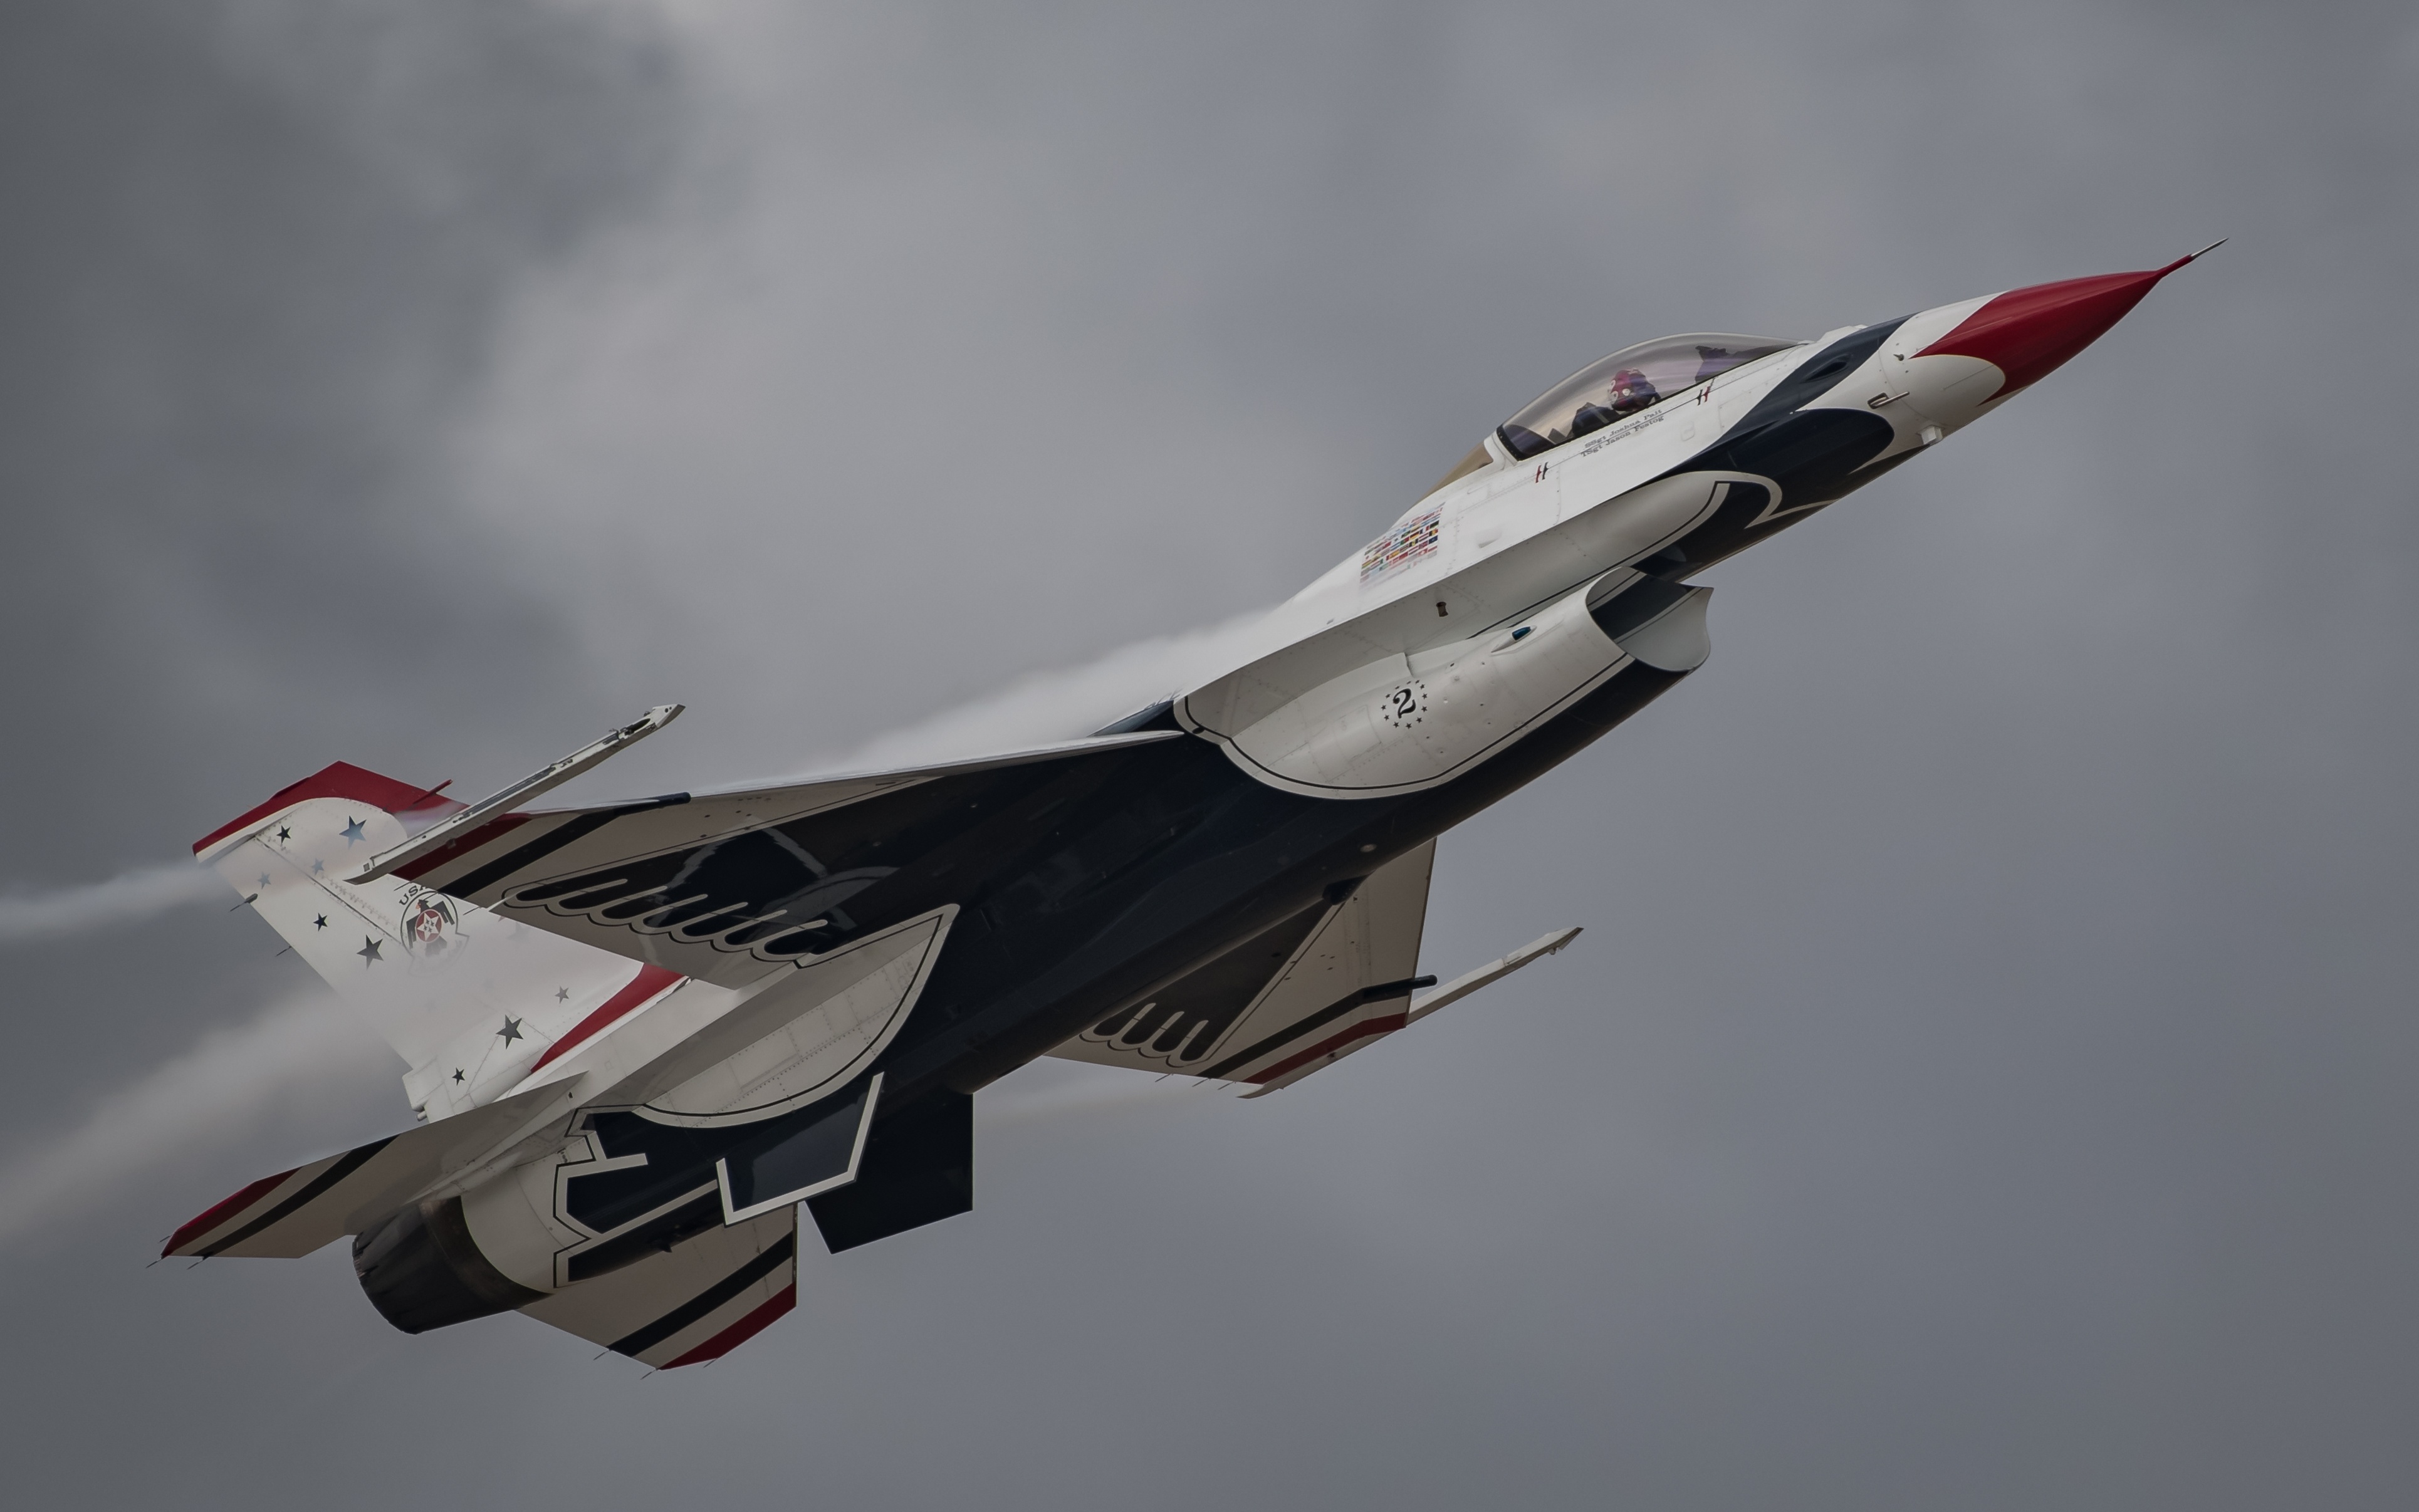 Aircraft United States Air Force Thunderbirds Jet Fighter 3860x2413